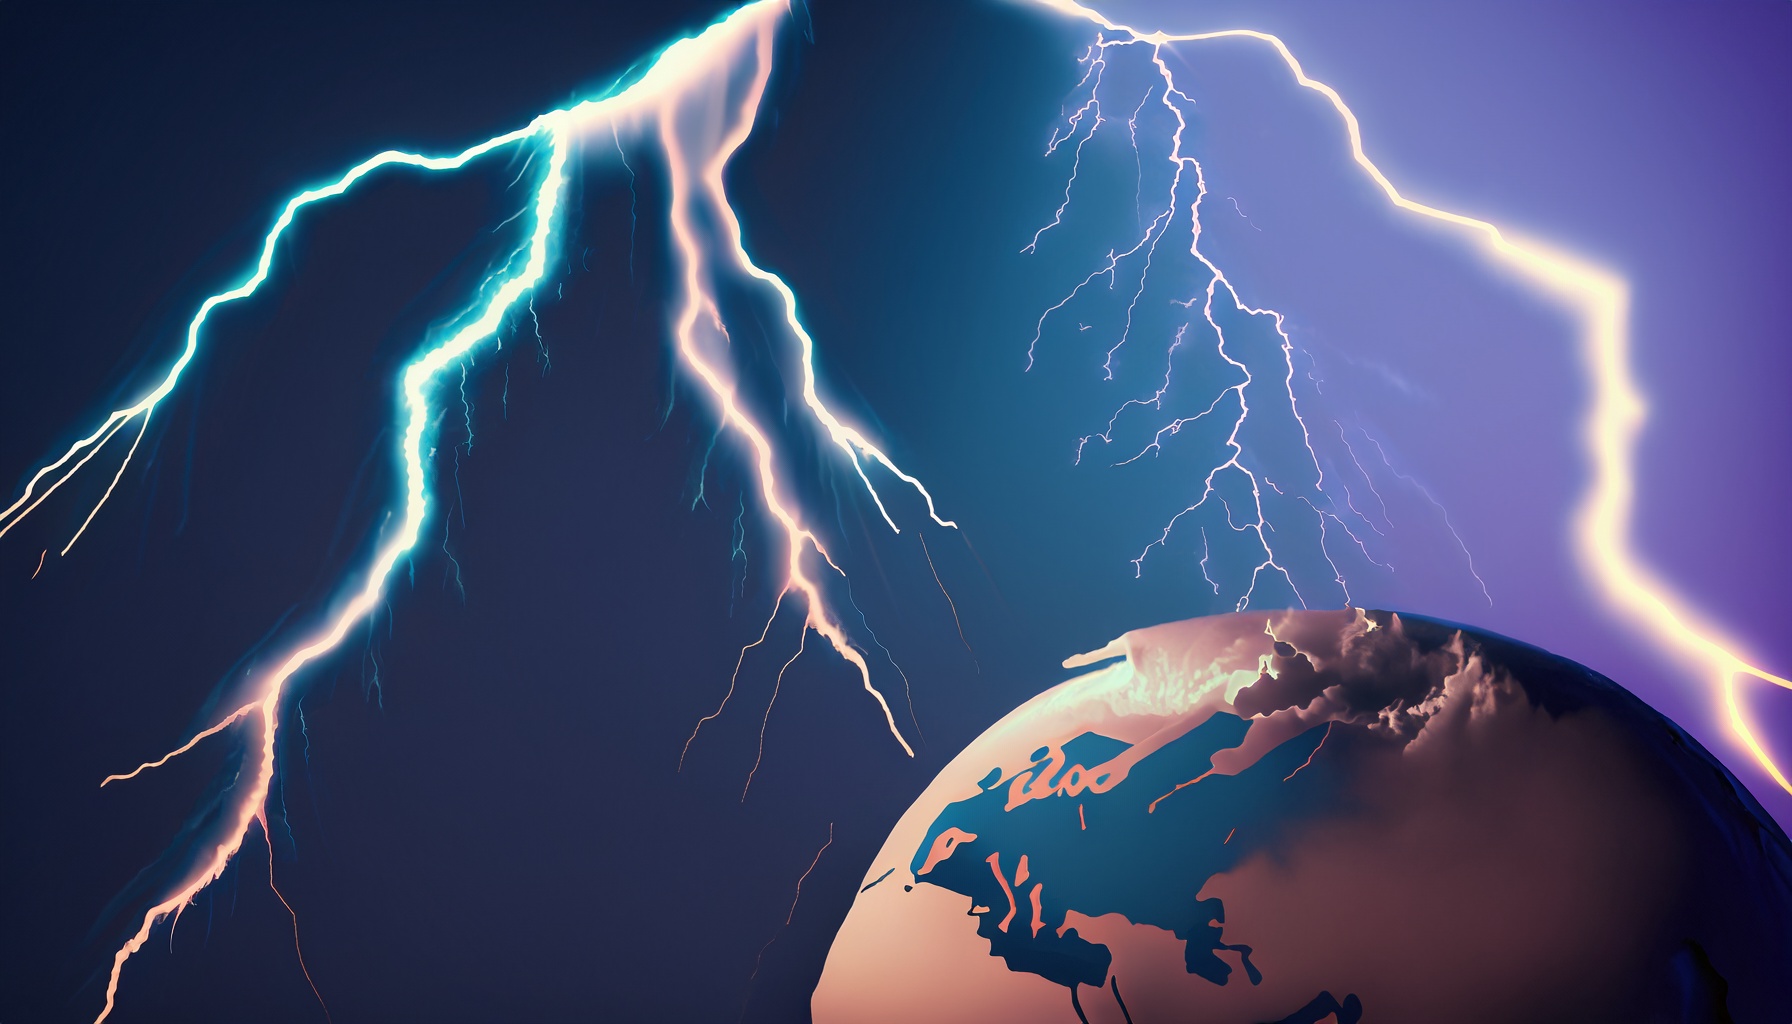 The Earth is struck by lightning about 100 times per second